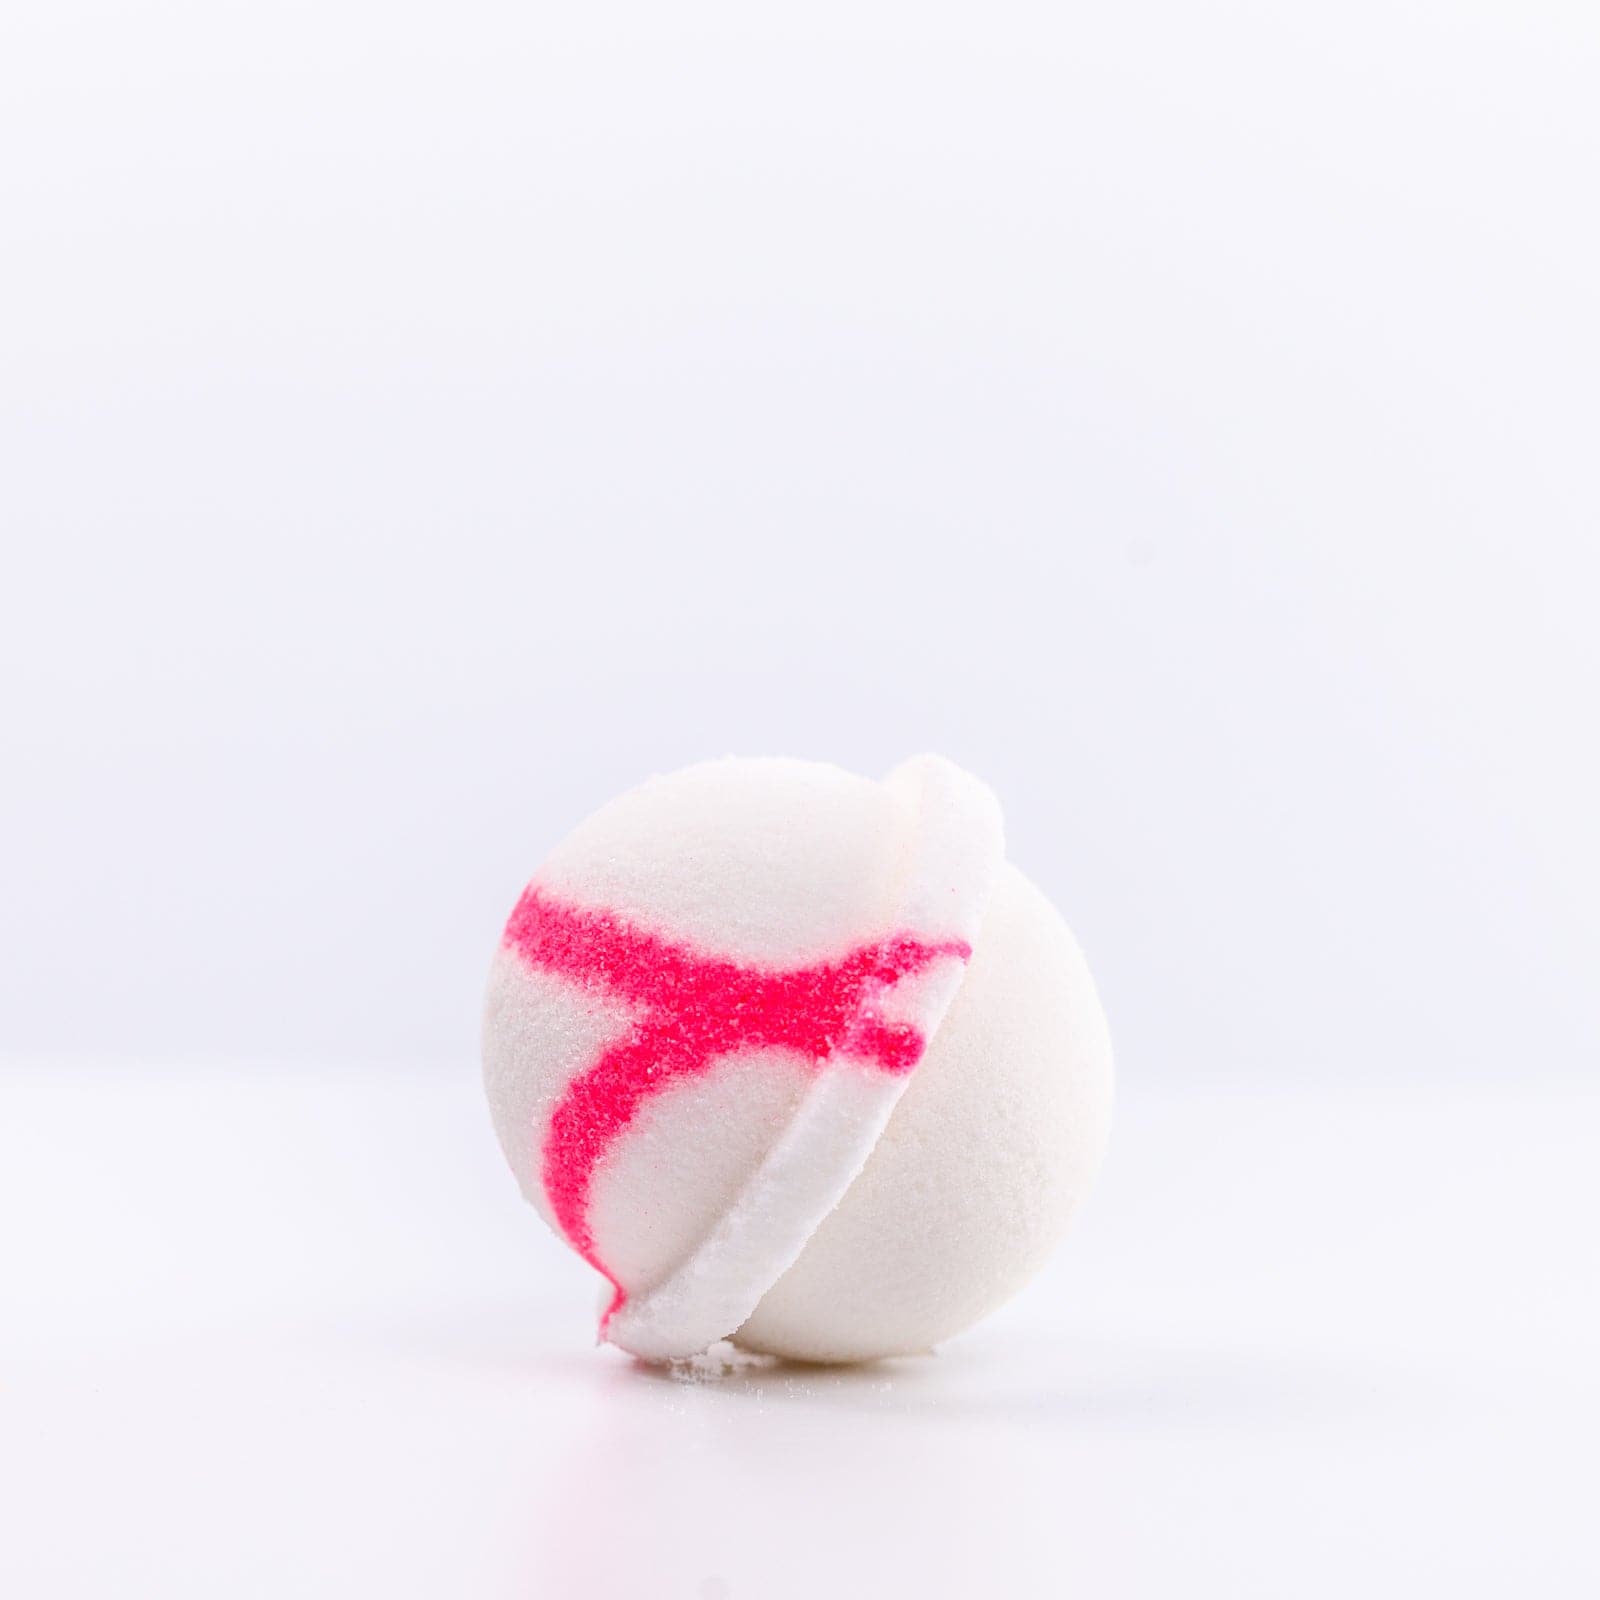 one white Mermaid Bath Bomb placed on its side with a pink "X" design on it